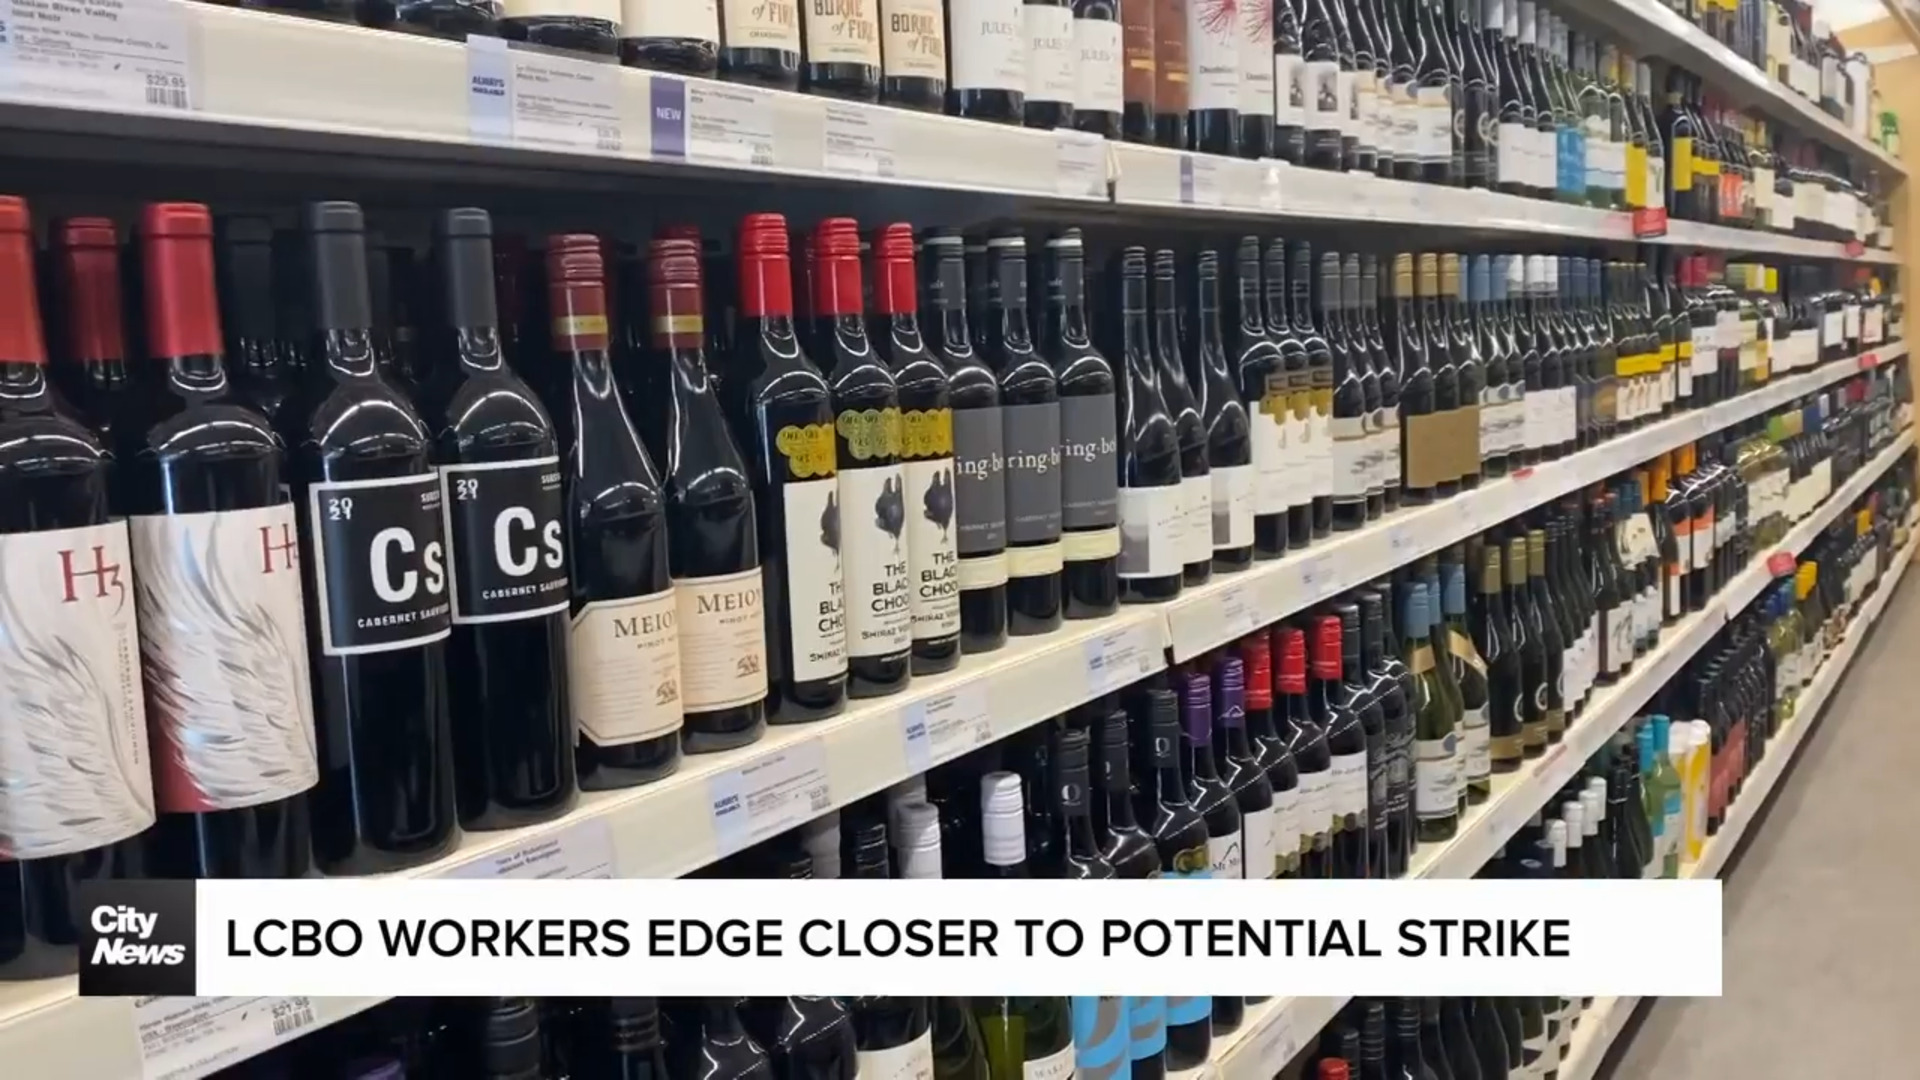 LCBO workers edge closer to potential strike